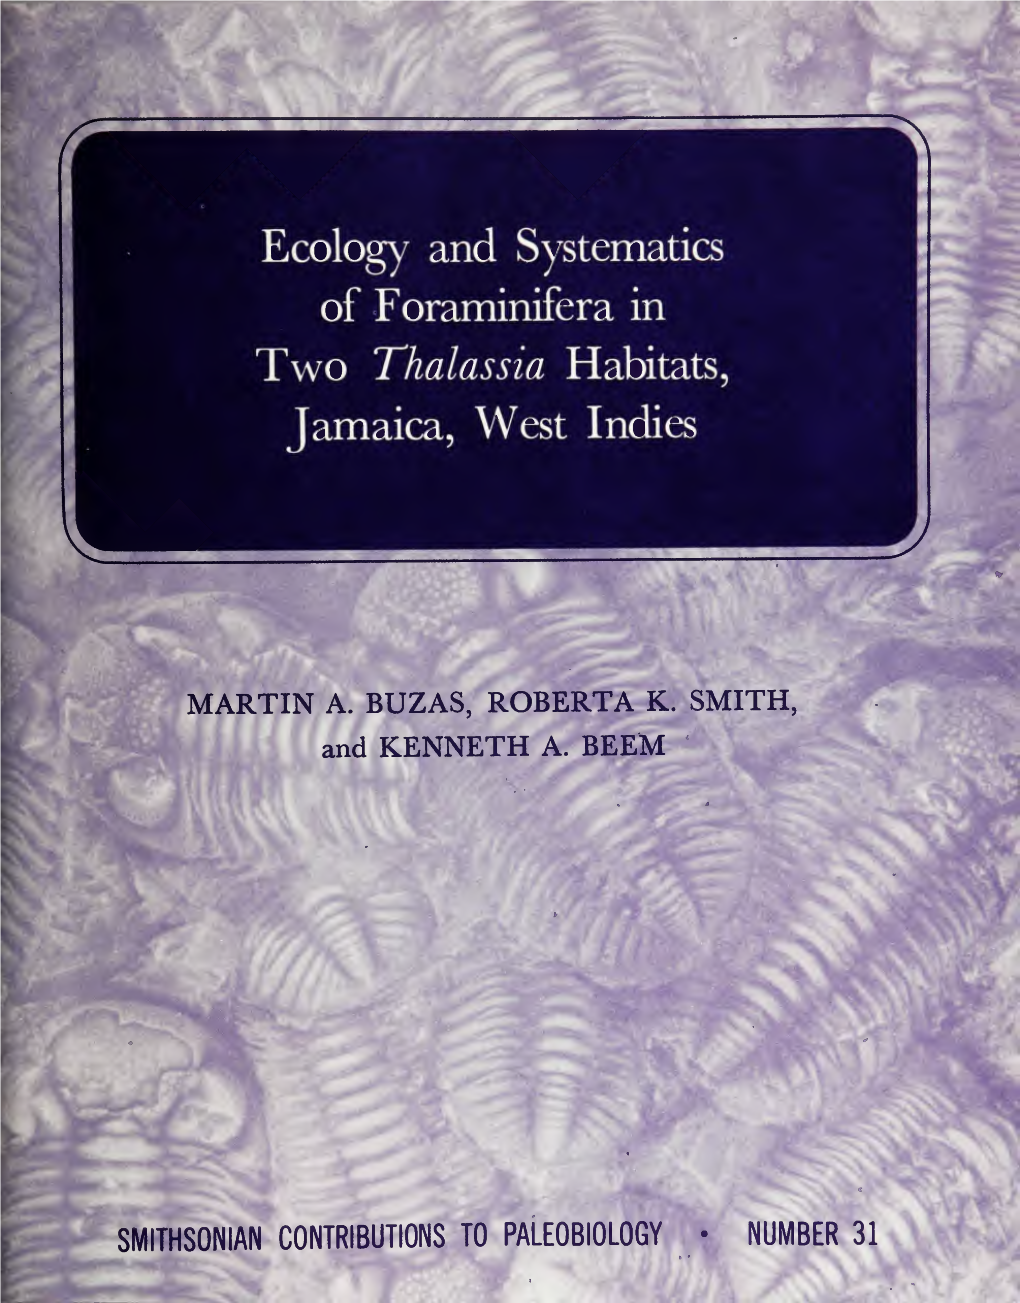 Ecology and Systematics of Foraminifera in Two Thalassia Habitats, Jamaica, West Indies